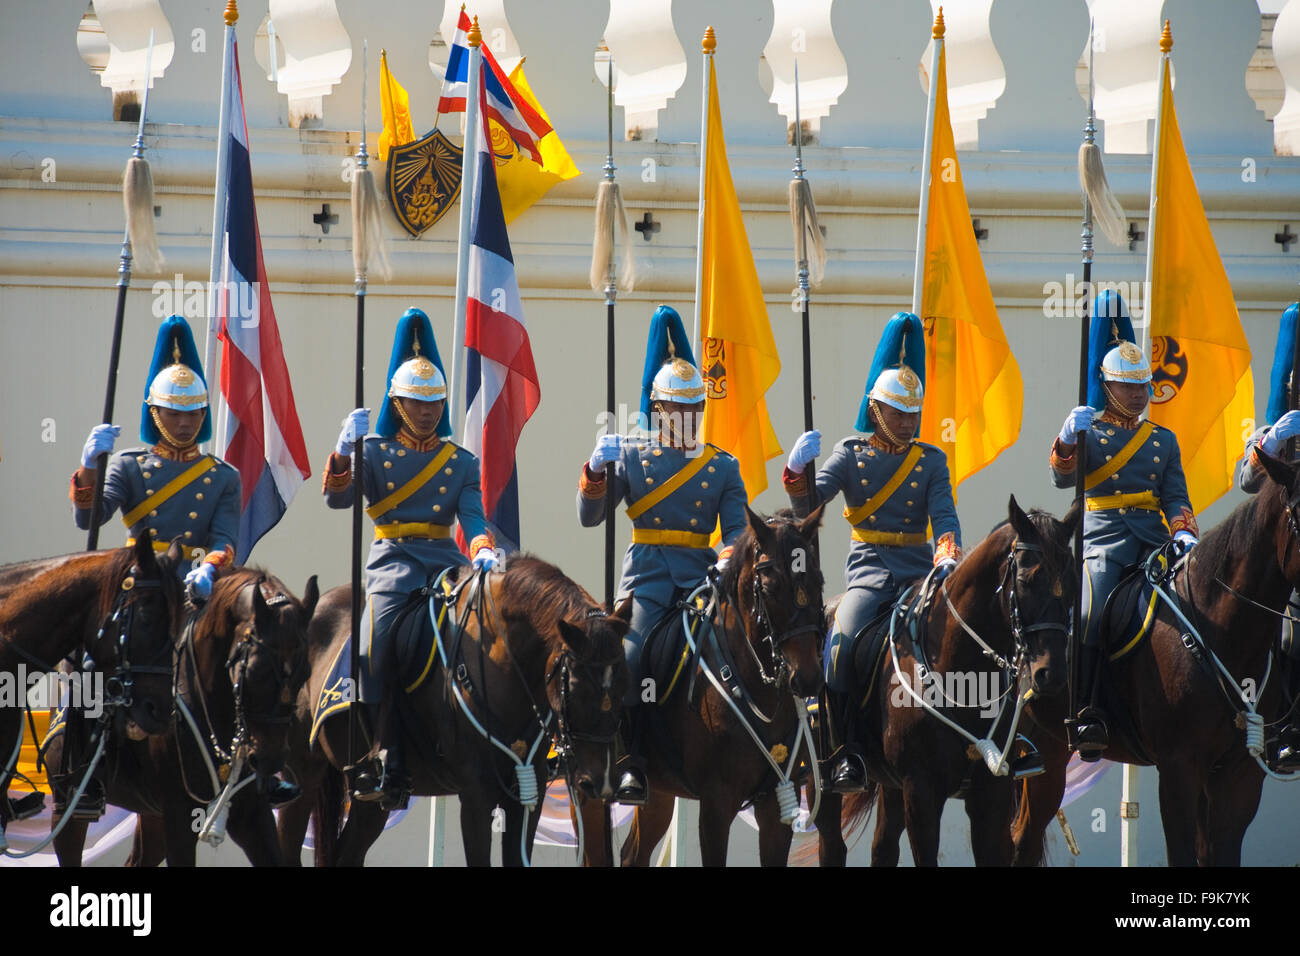 Thai Royal Mounted Guards on horses holding flags stand in formation awaiting the King at his birthday parade National Palace Stock Photo